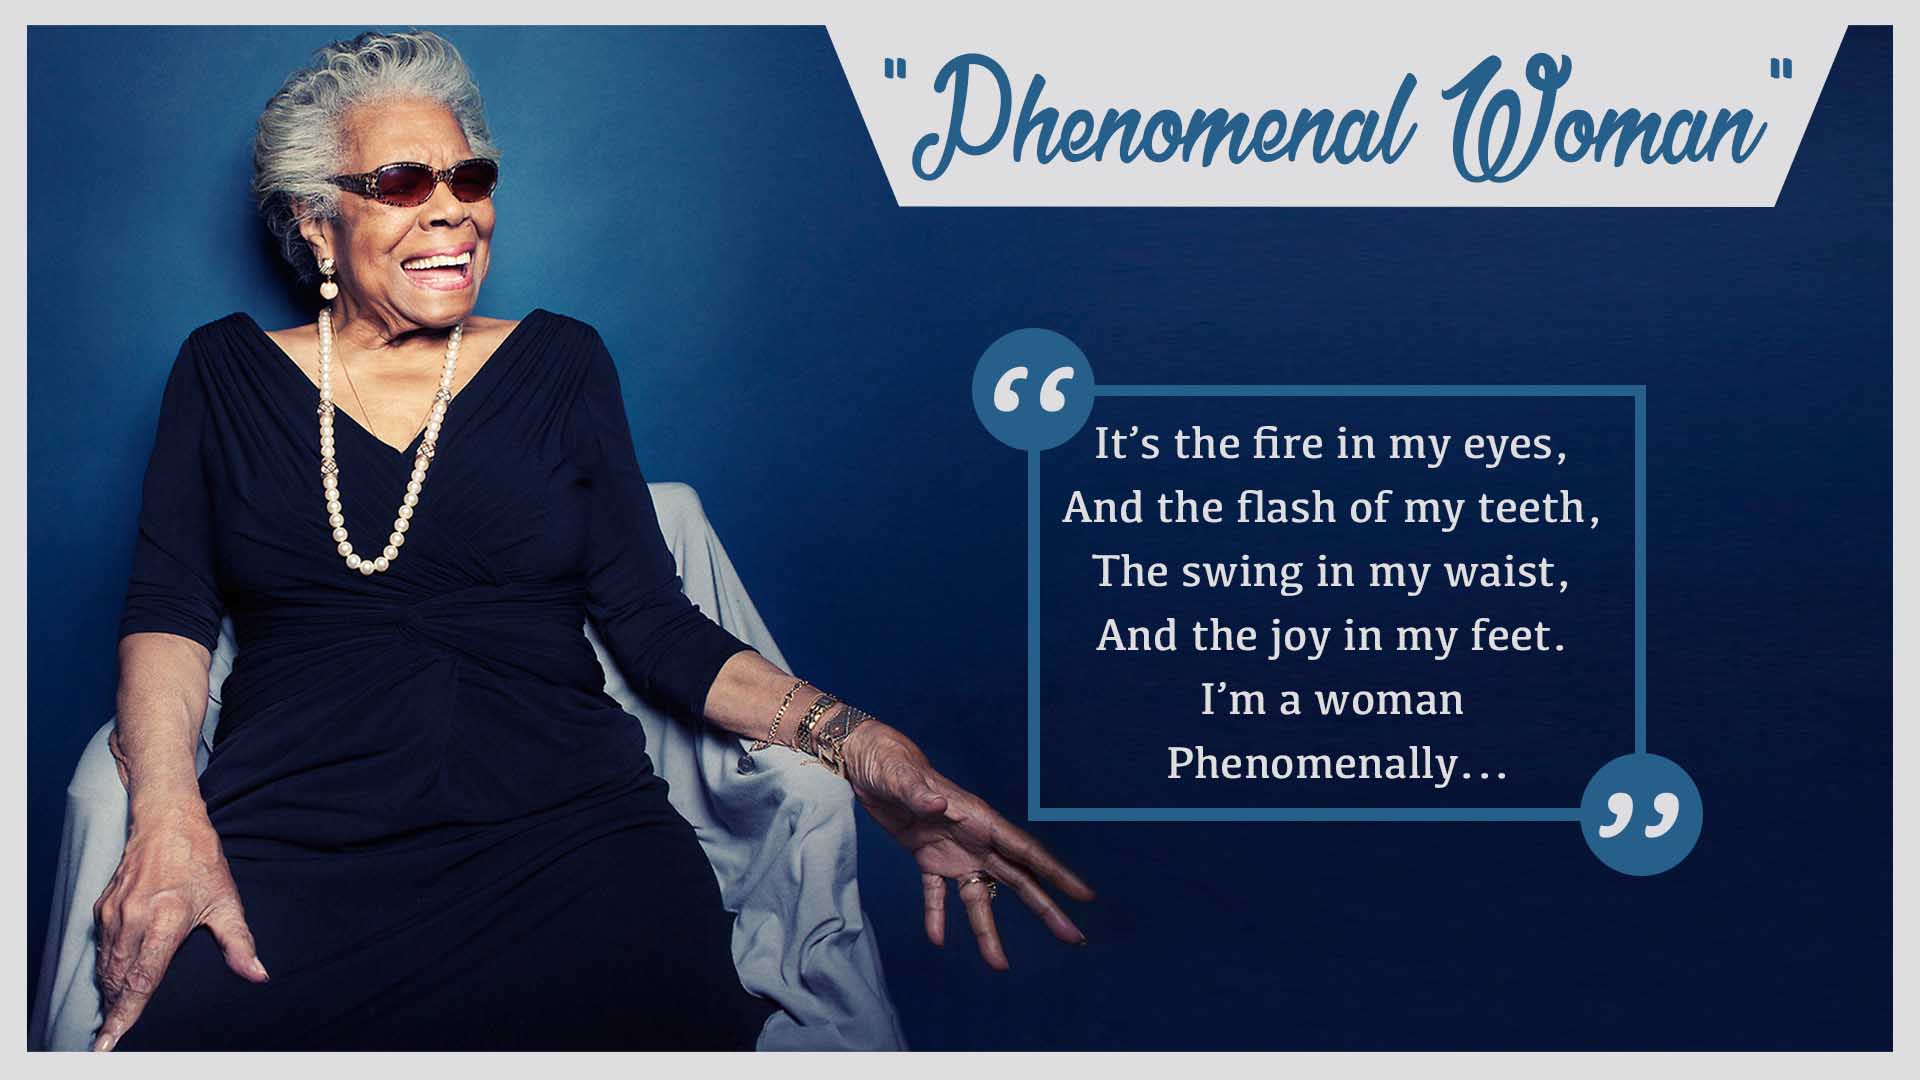 Maya Angelou, the legacy lives on